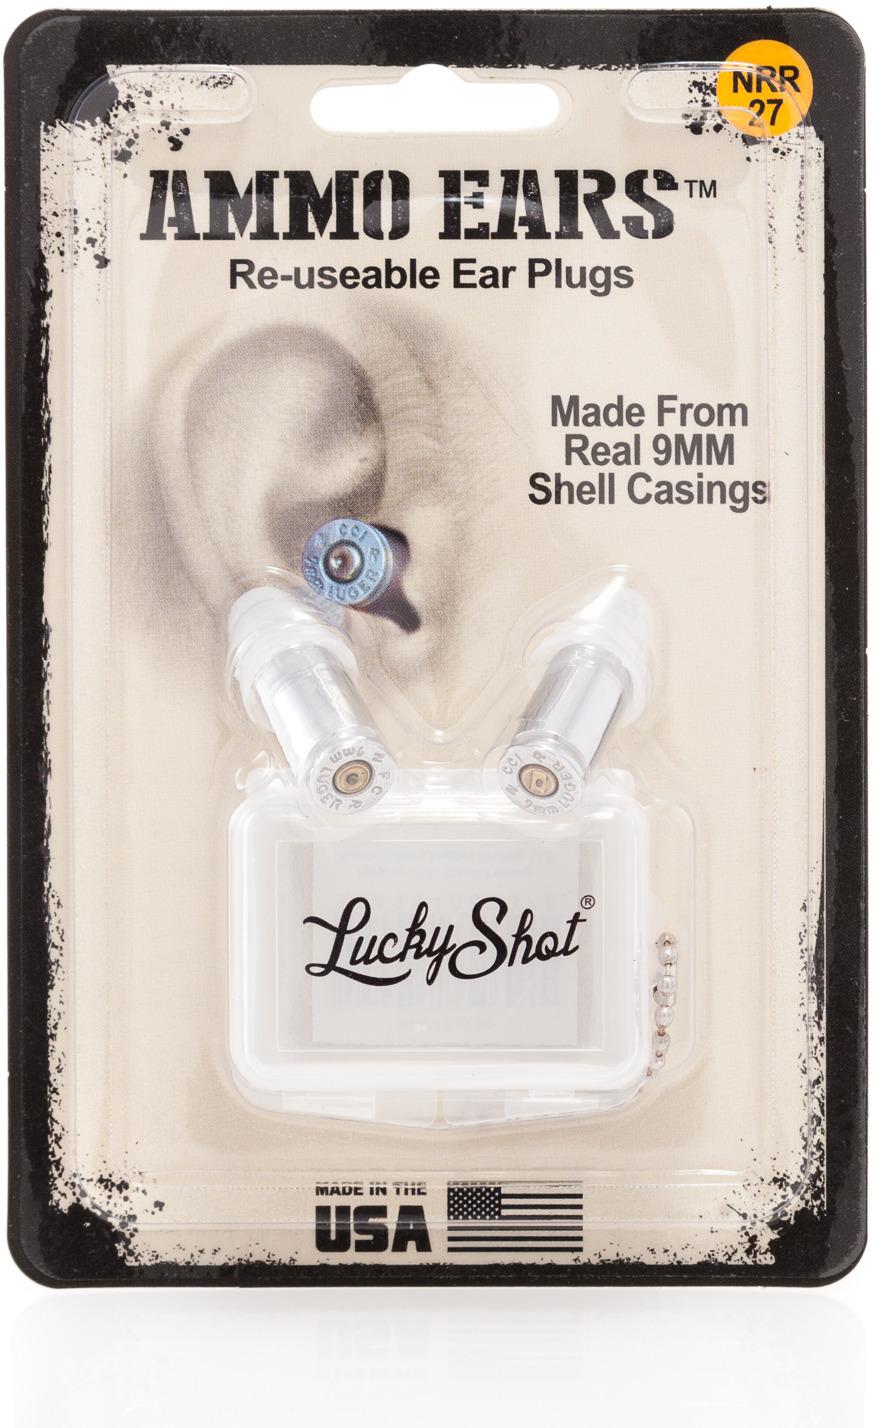 Lucky Shot LSEP-9BP 9mm Bullet Ear Plugs rated at 27NRR - Packaged